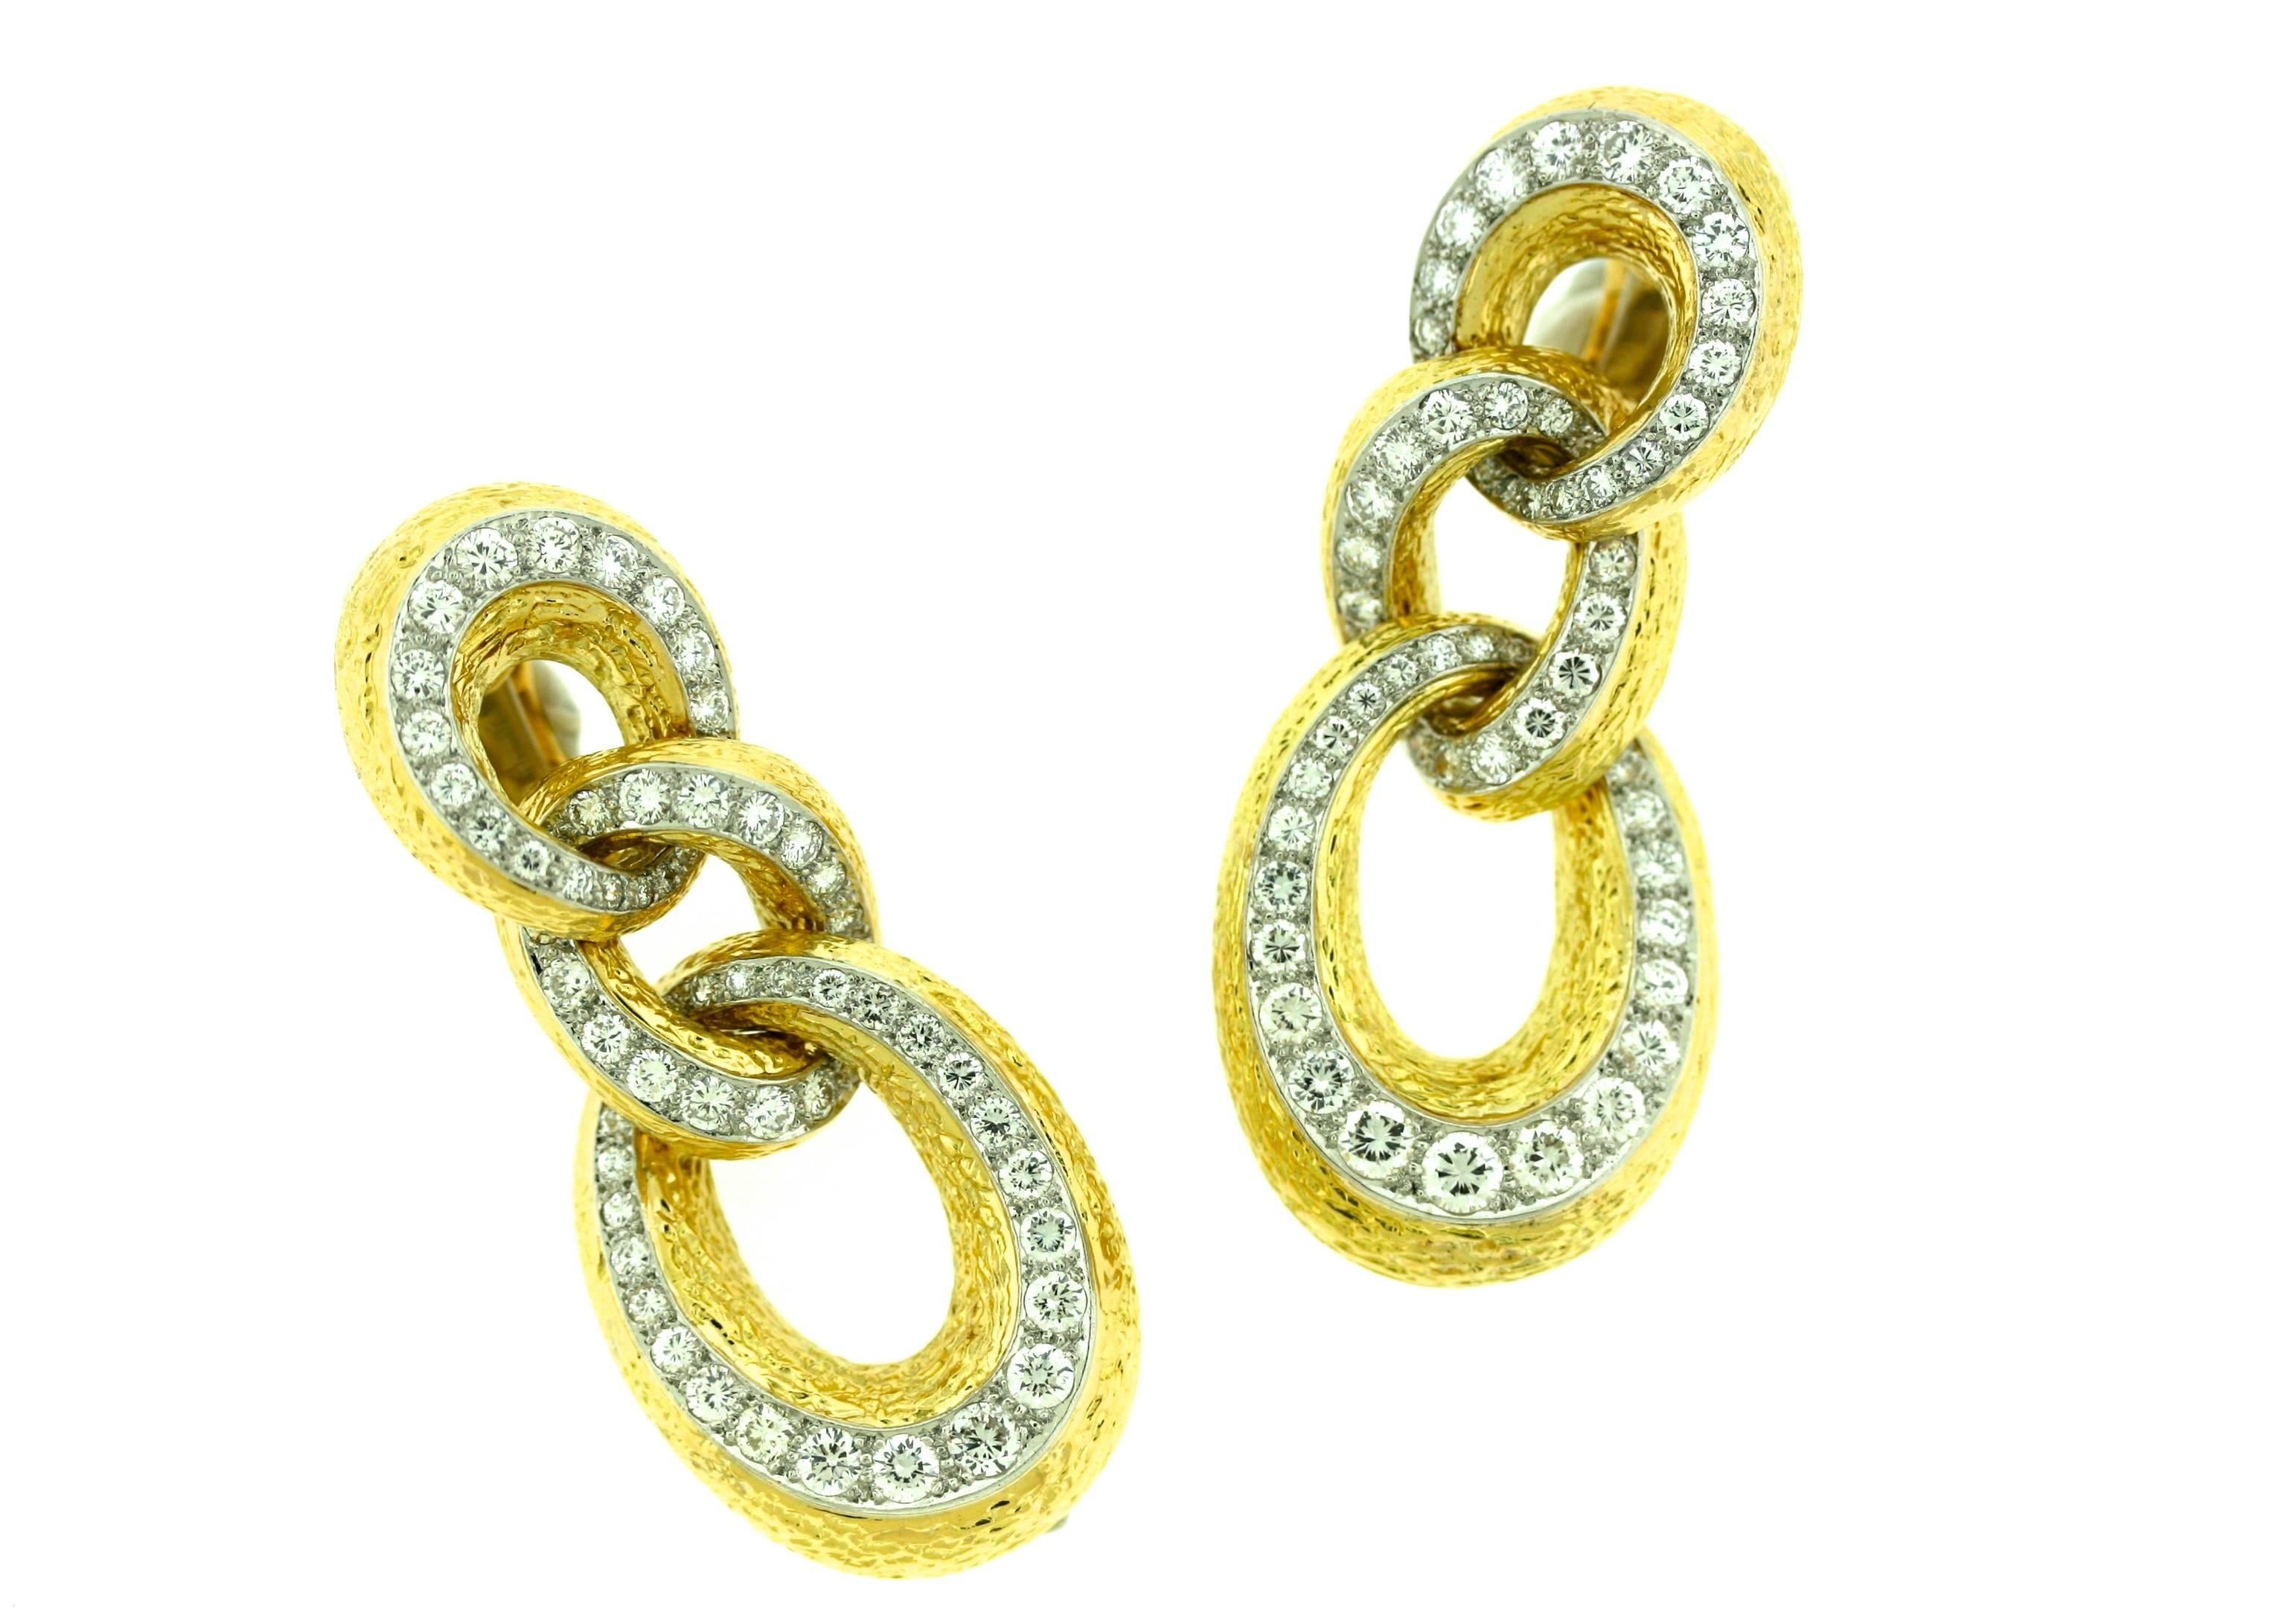 Van Cleef & Arpels textured 18k gold ear clips designed as three interlocking vertical oval hoops with approximately seven carats of diamonds set in platinum. 2.5